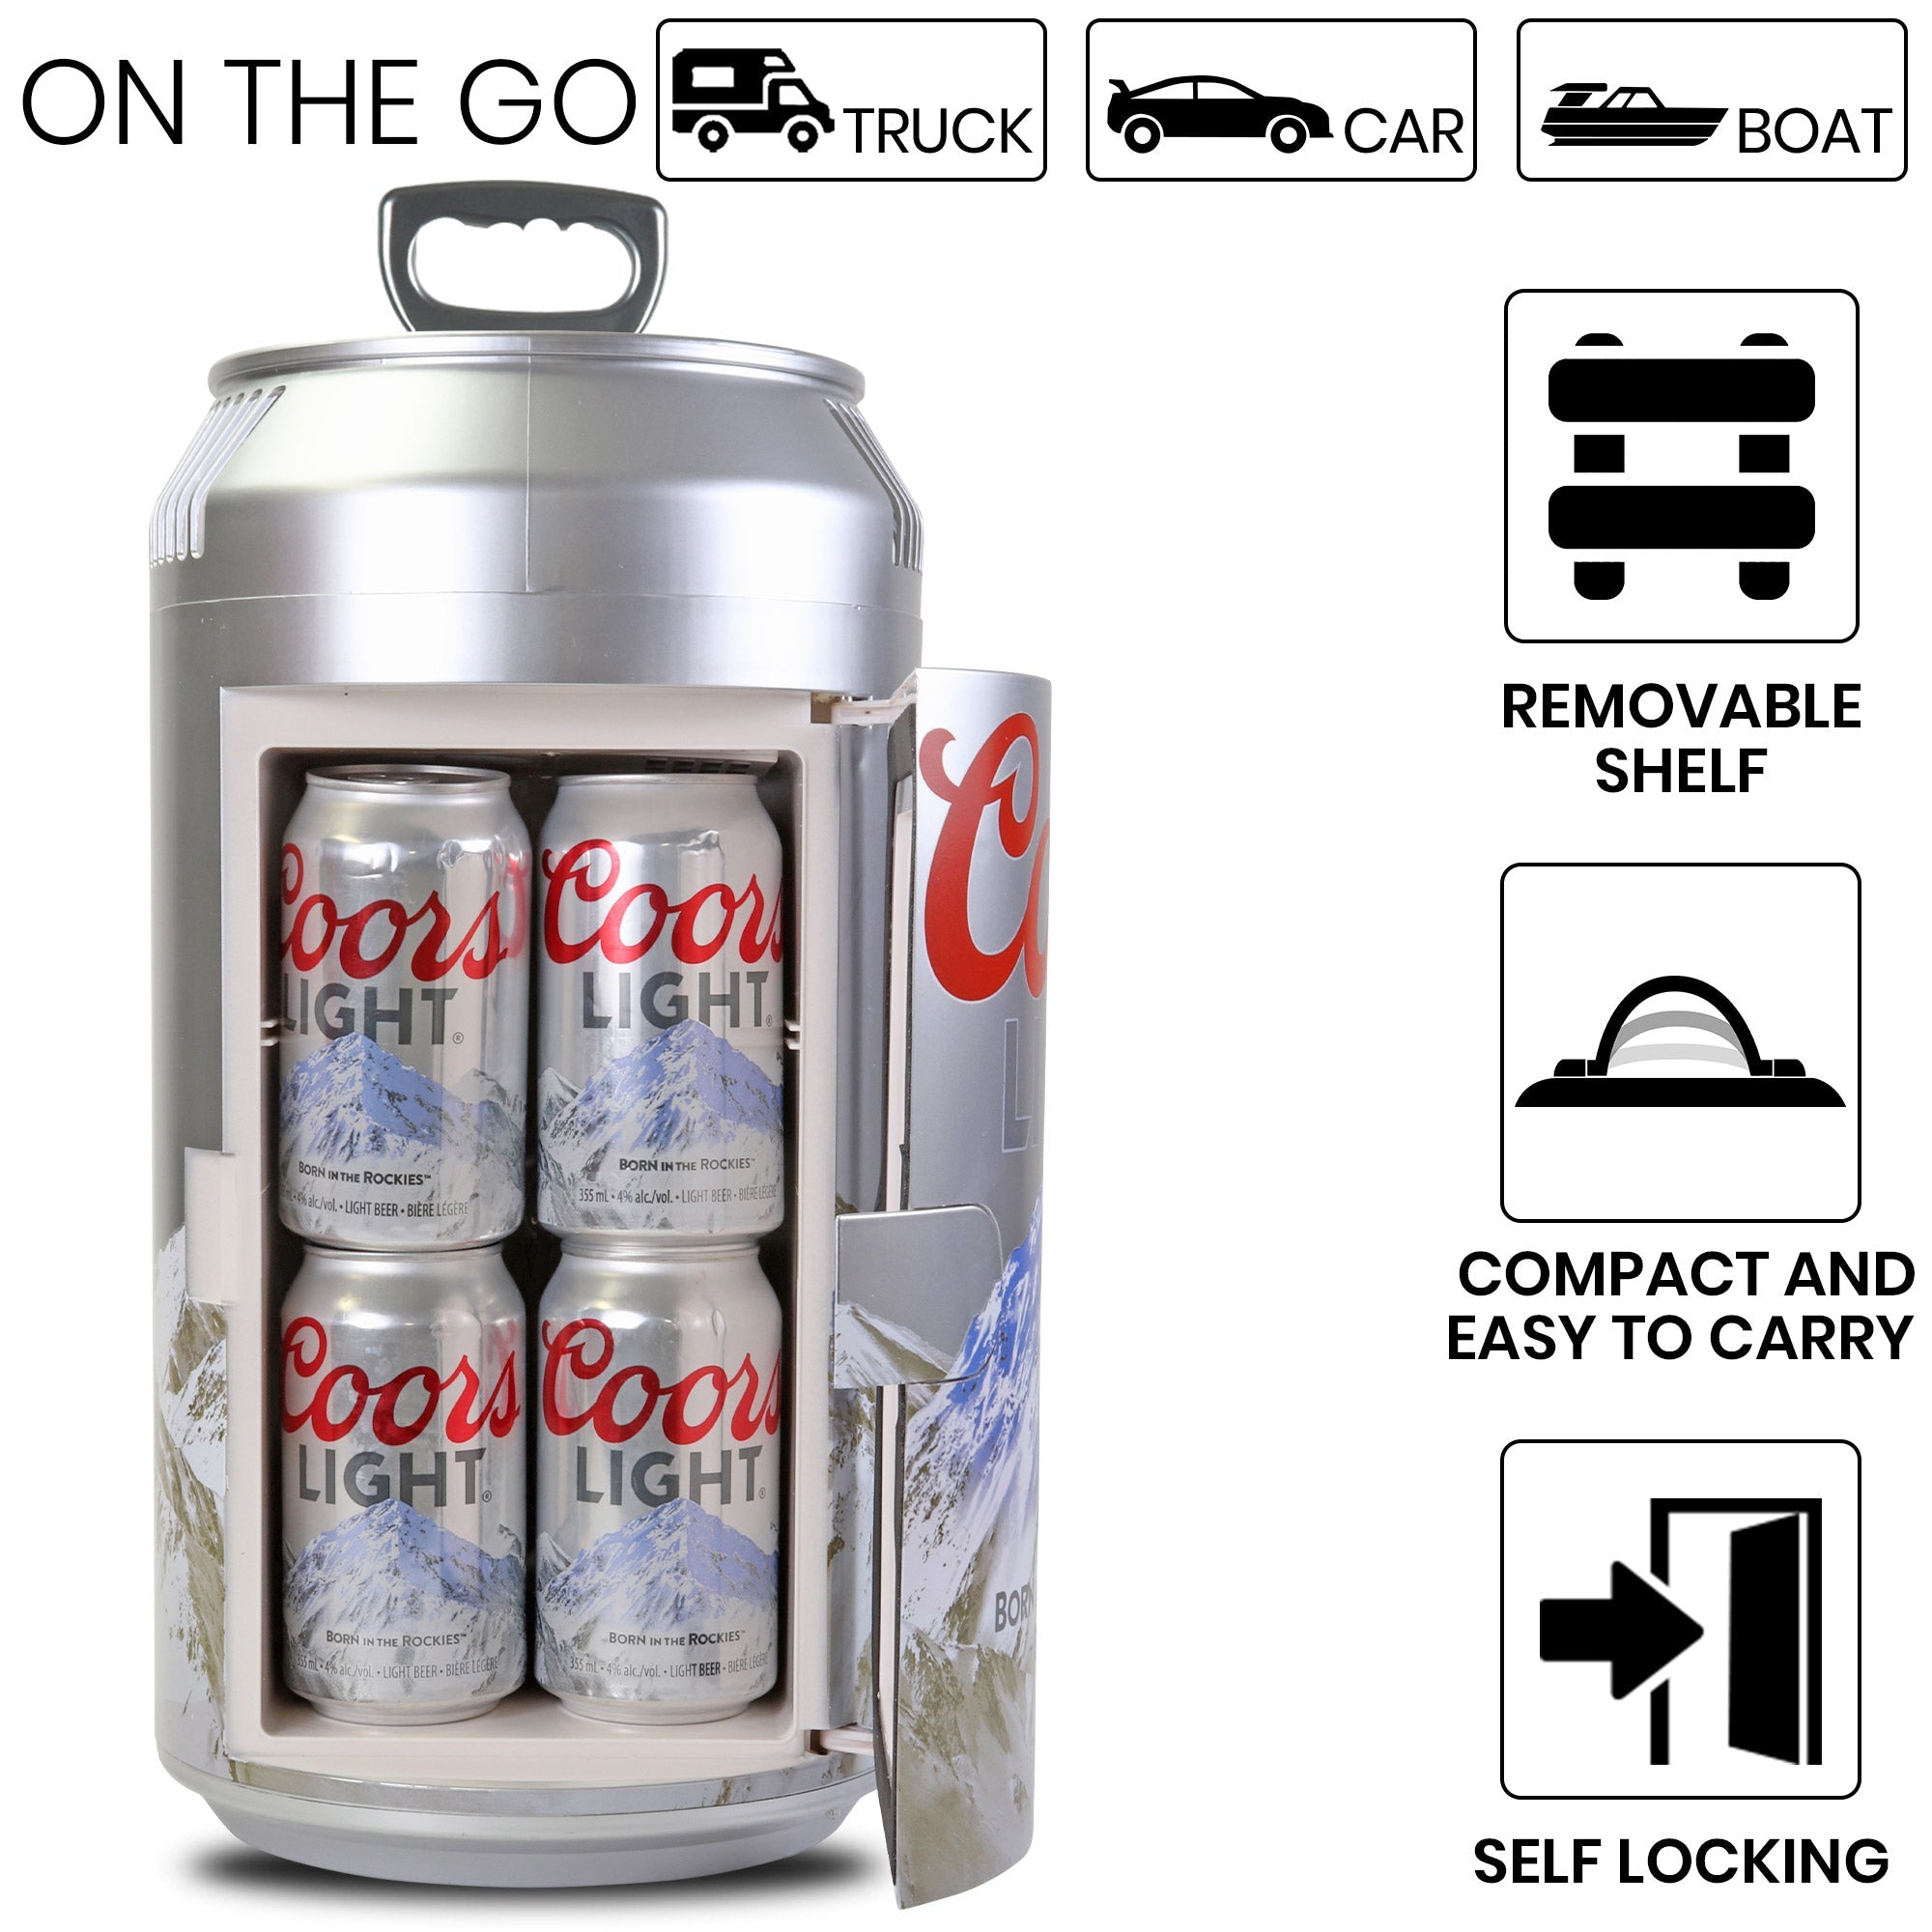 Closeup image of open cooler with shelf removed and 8 cans of Coors Light beer inside and pull-tab carry handle flipped up. Above are icons and text describing: On the go - truck, car, boat. To the right are icons and text describing: Removable shelf; compact and easy to carry; self-locking